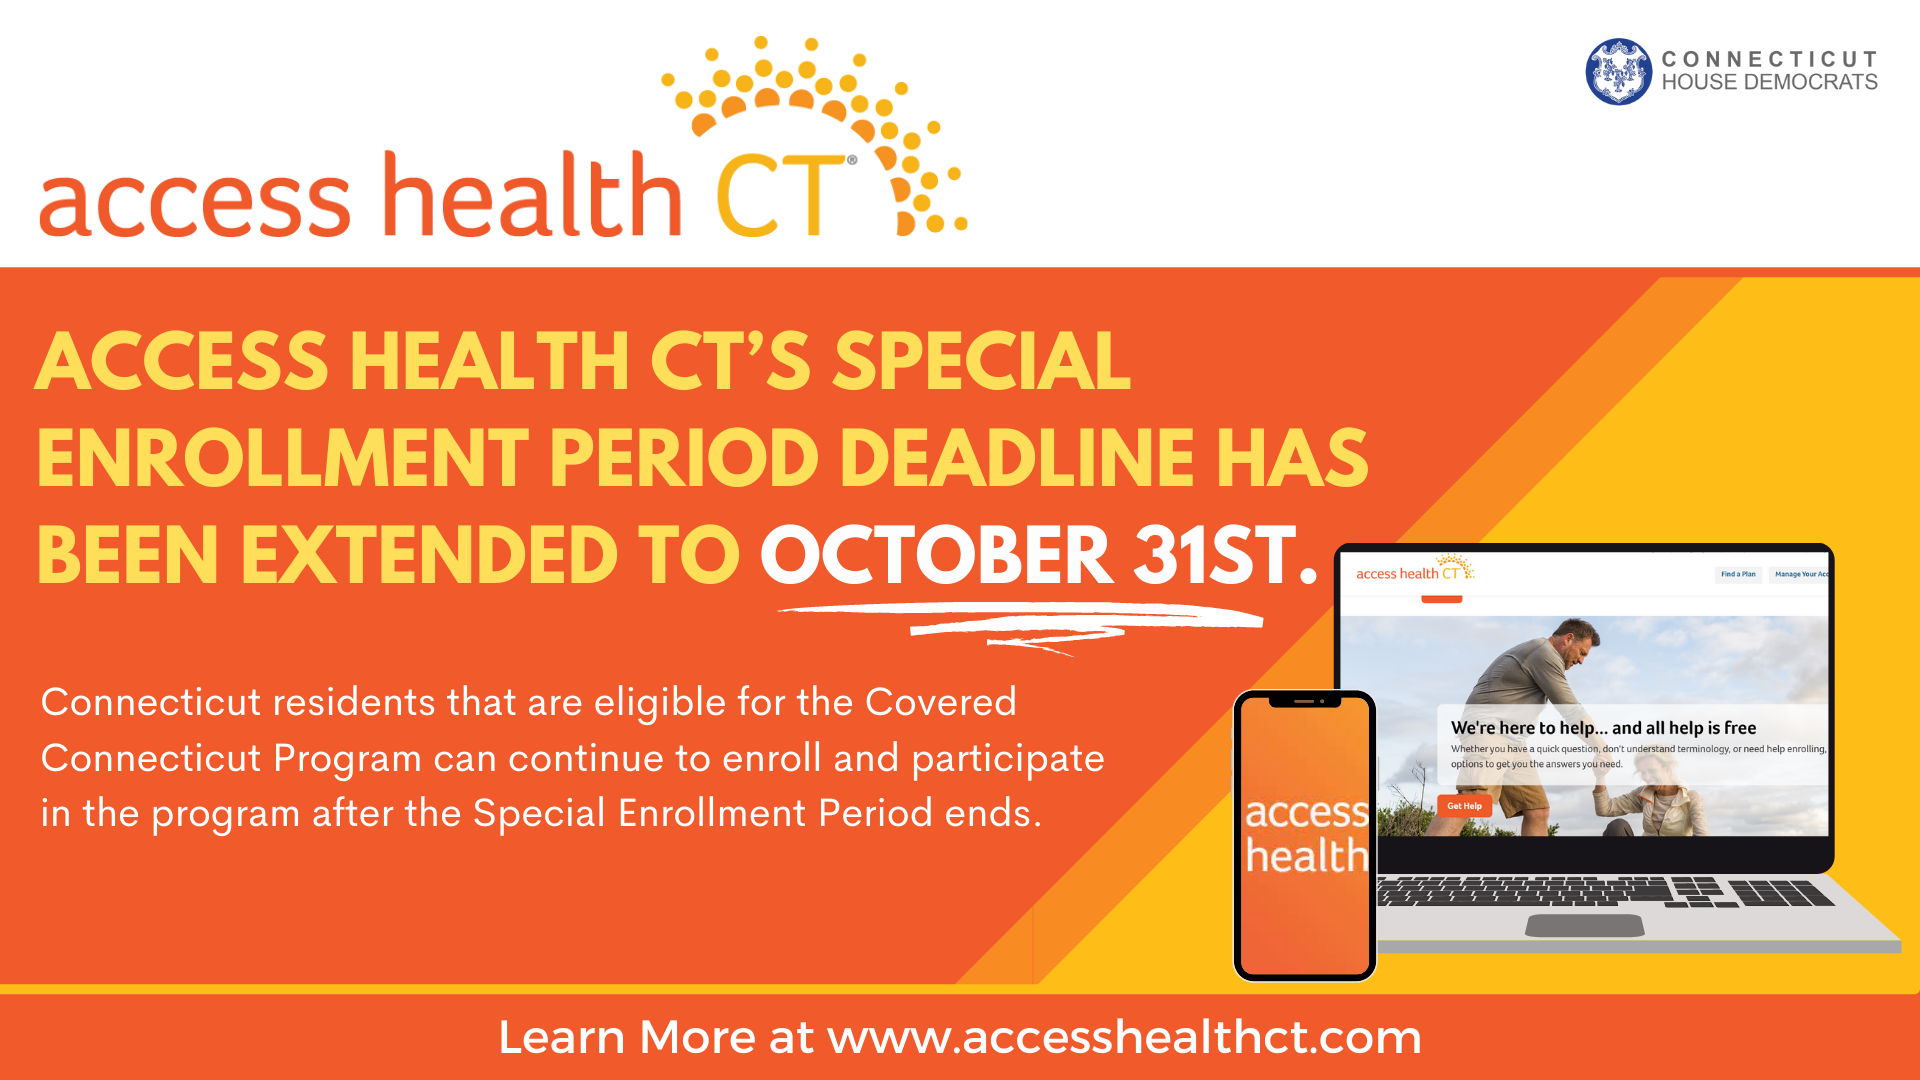 Access Health CT Extends Special Enrollment Period Deadline to October 31st